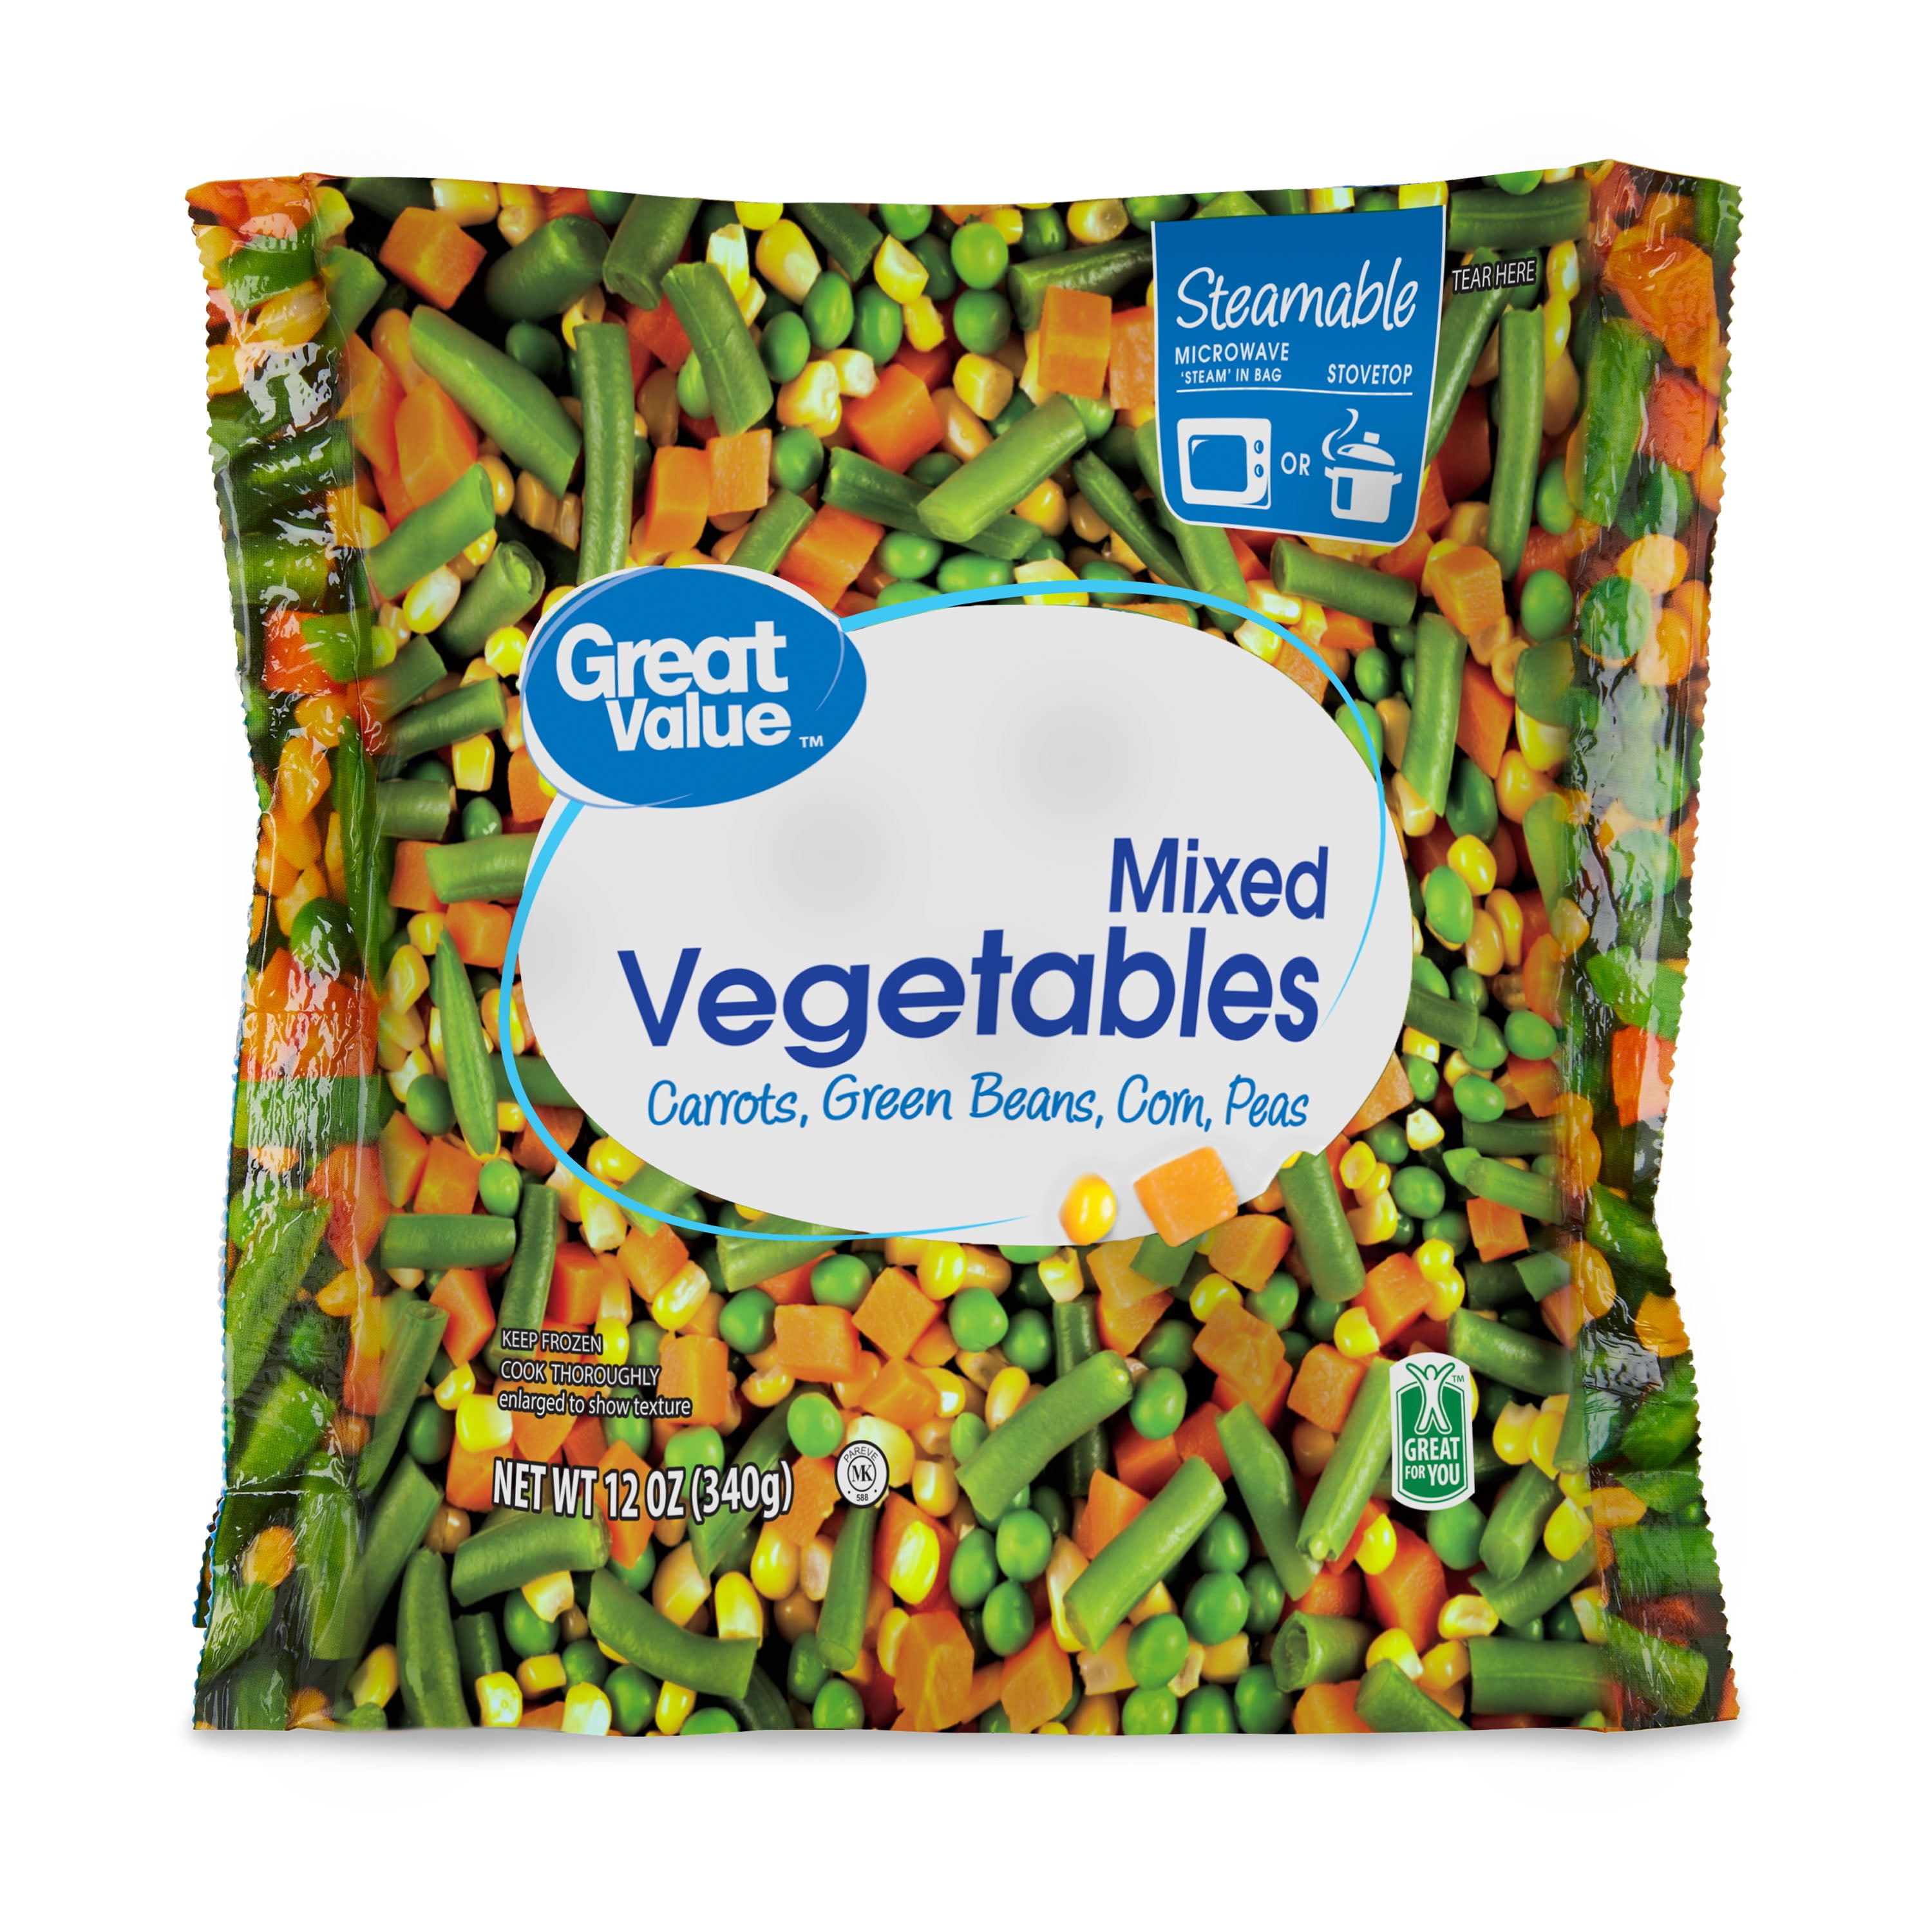 Great Value Steamable Mixed Vegetables, 12 oz